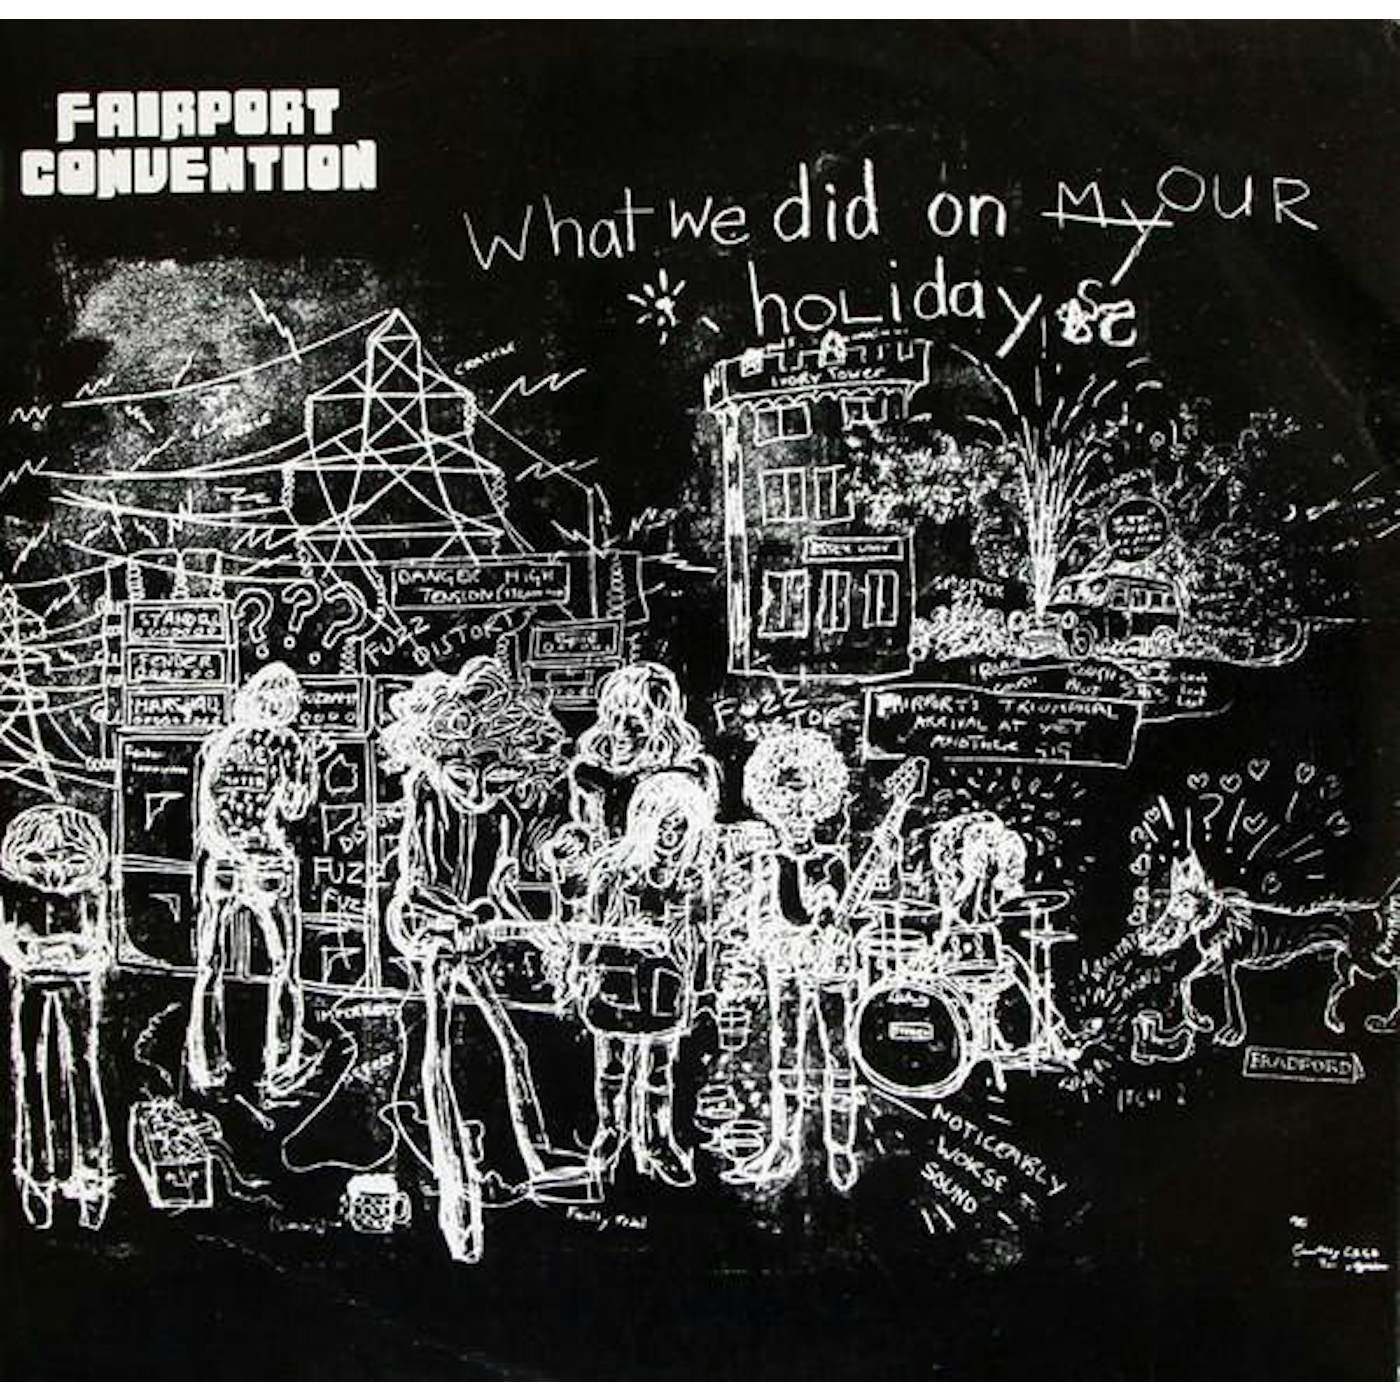 Fairport Convention WHAT WE DID ON OUR HOLIDAYS Vinyl Record